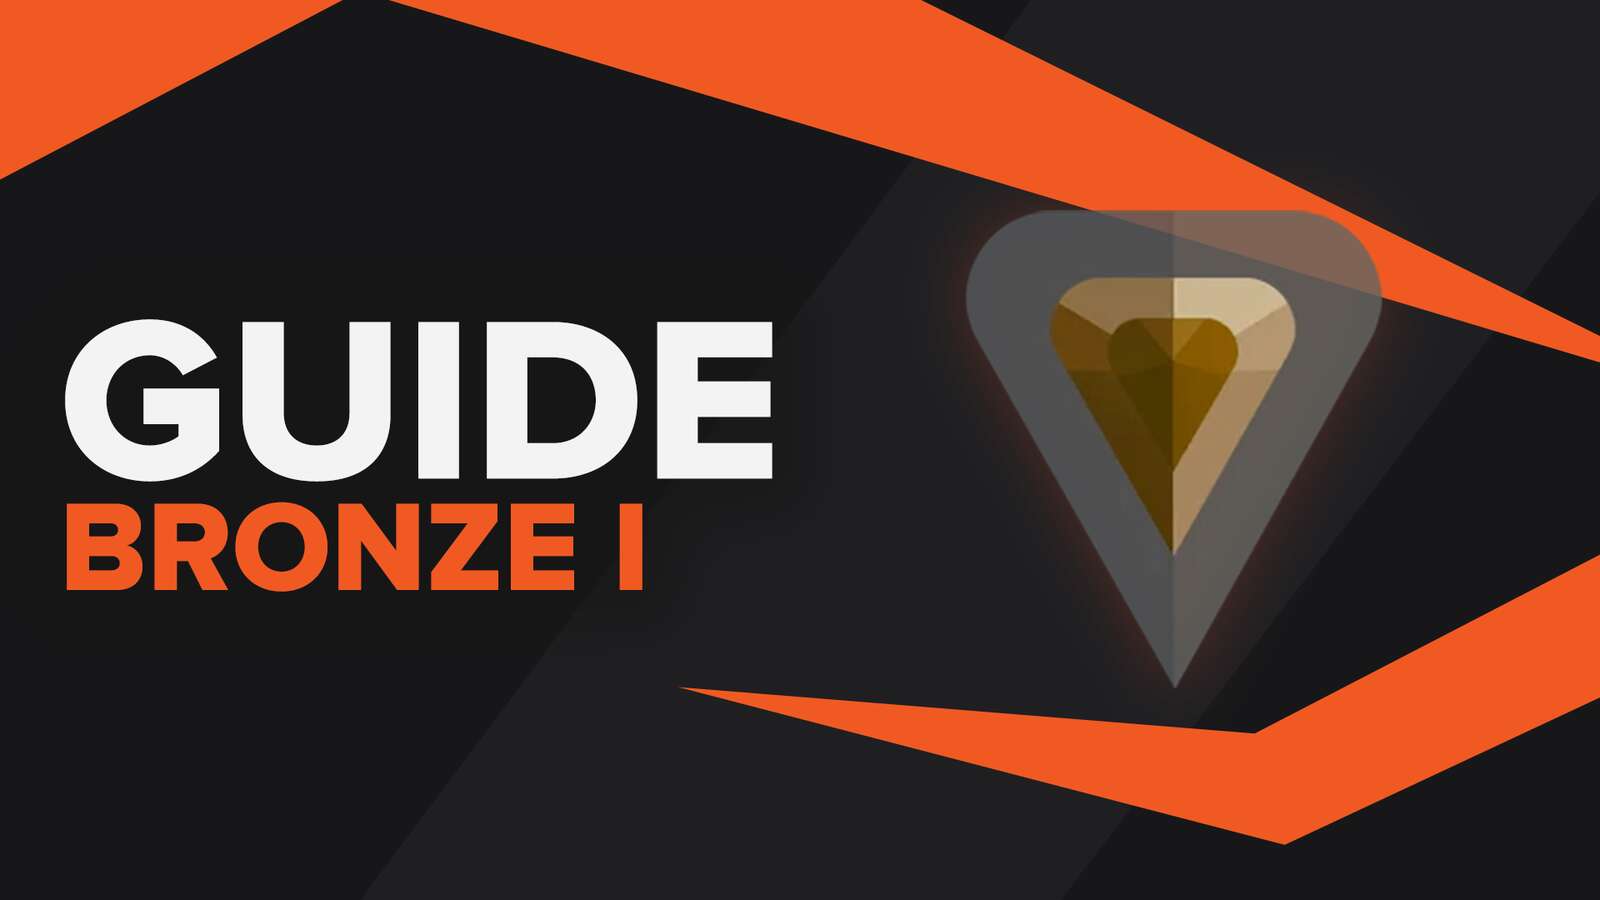 Bronze 1 Valorant Rank | All You Need To Know